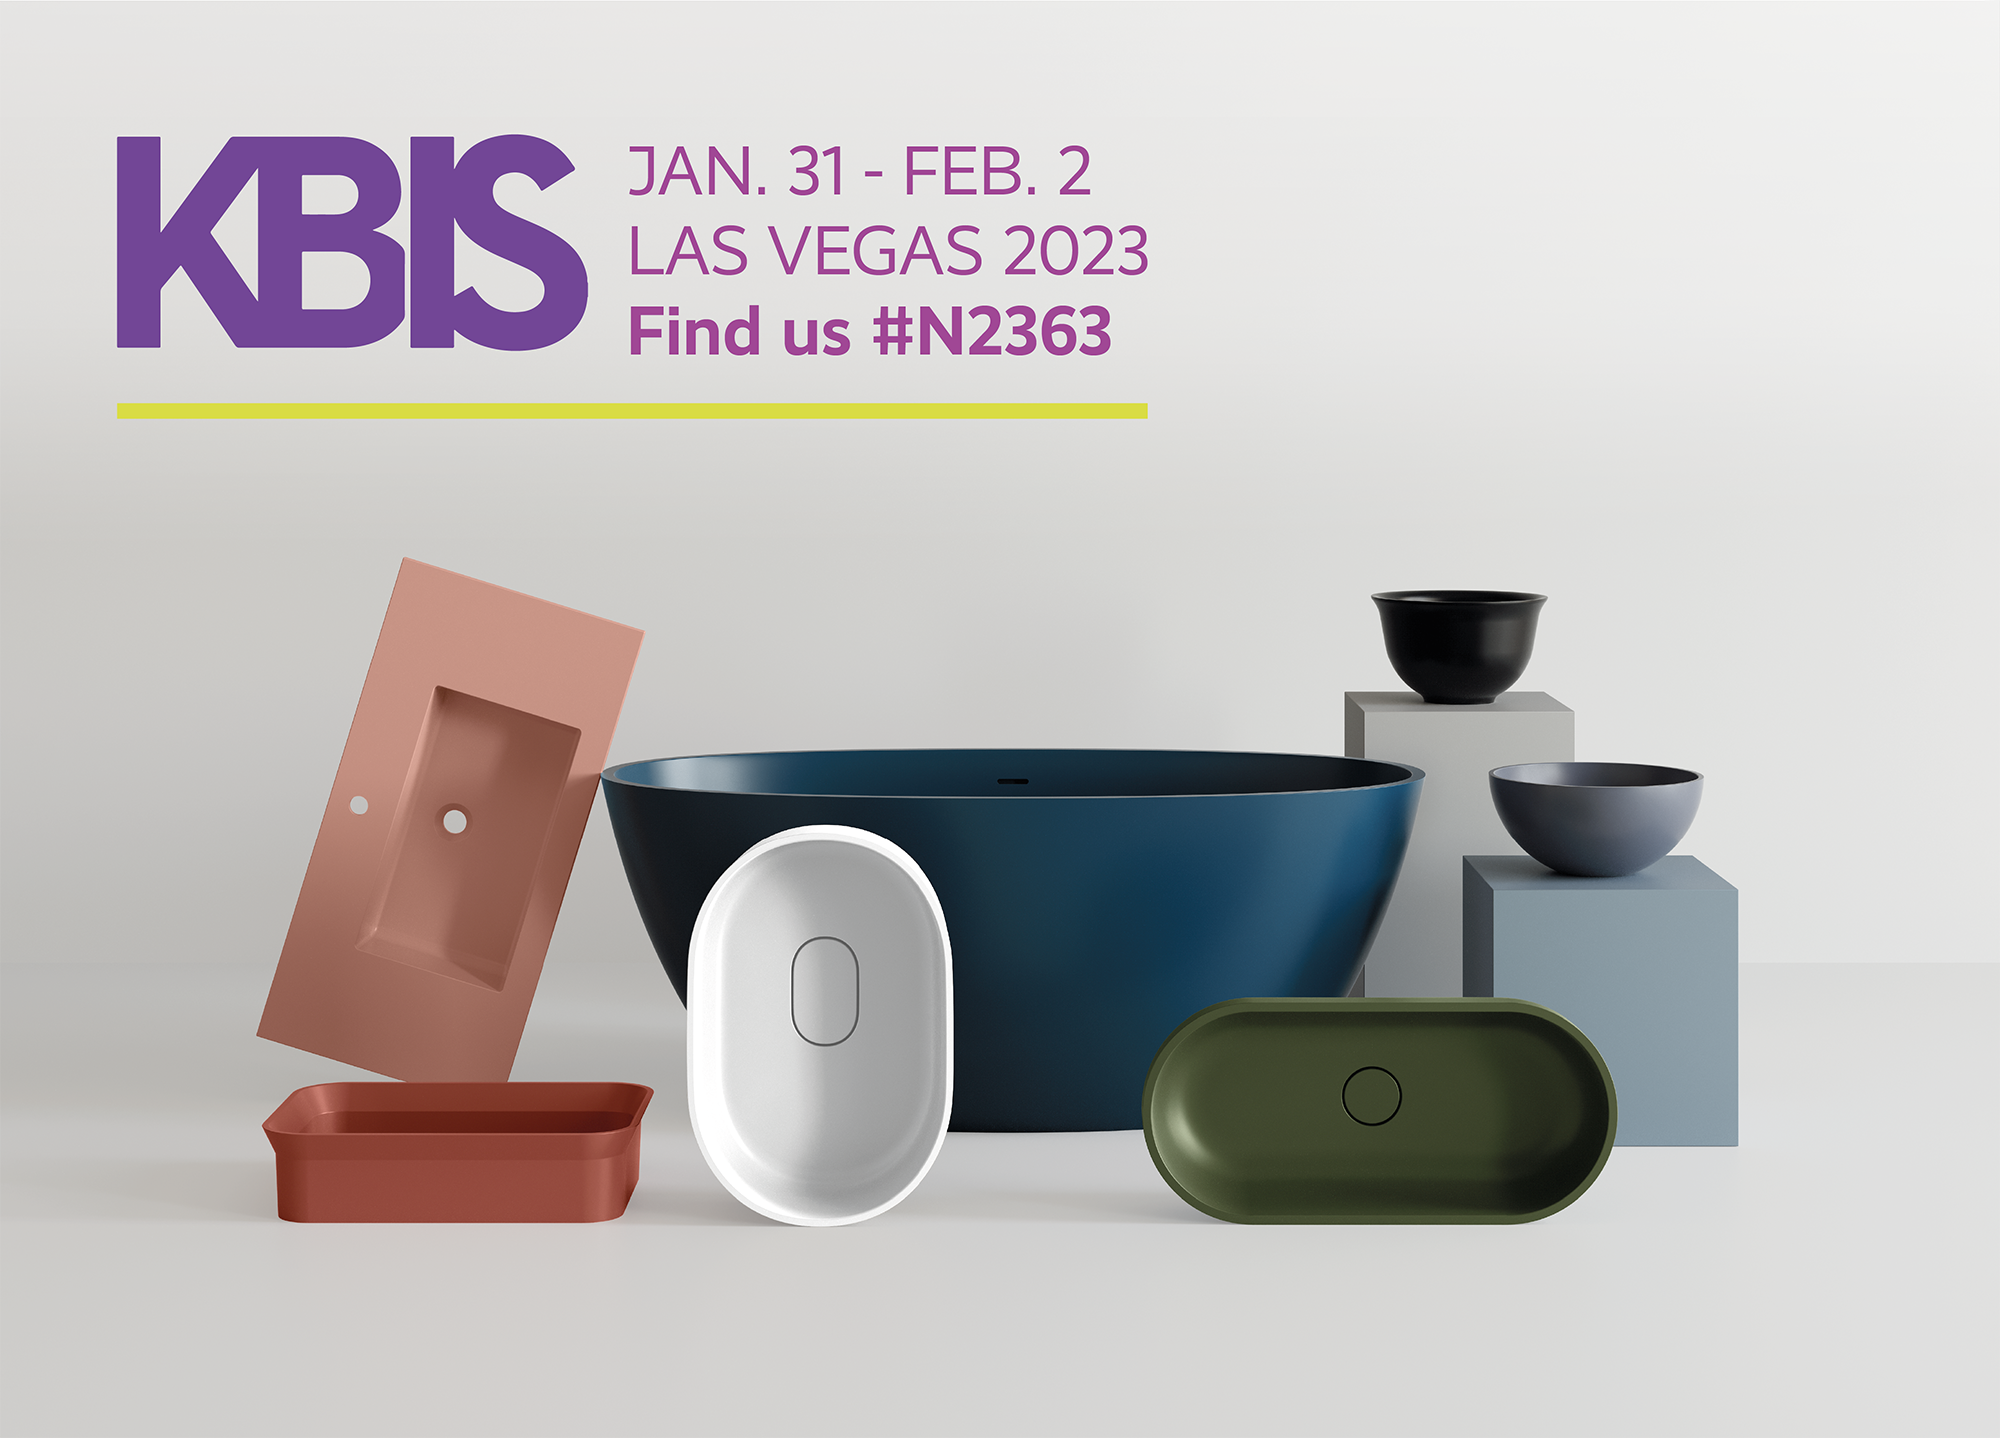 WE INVITE YOU TO VISIT US AT KBIS 2023